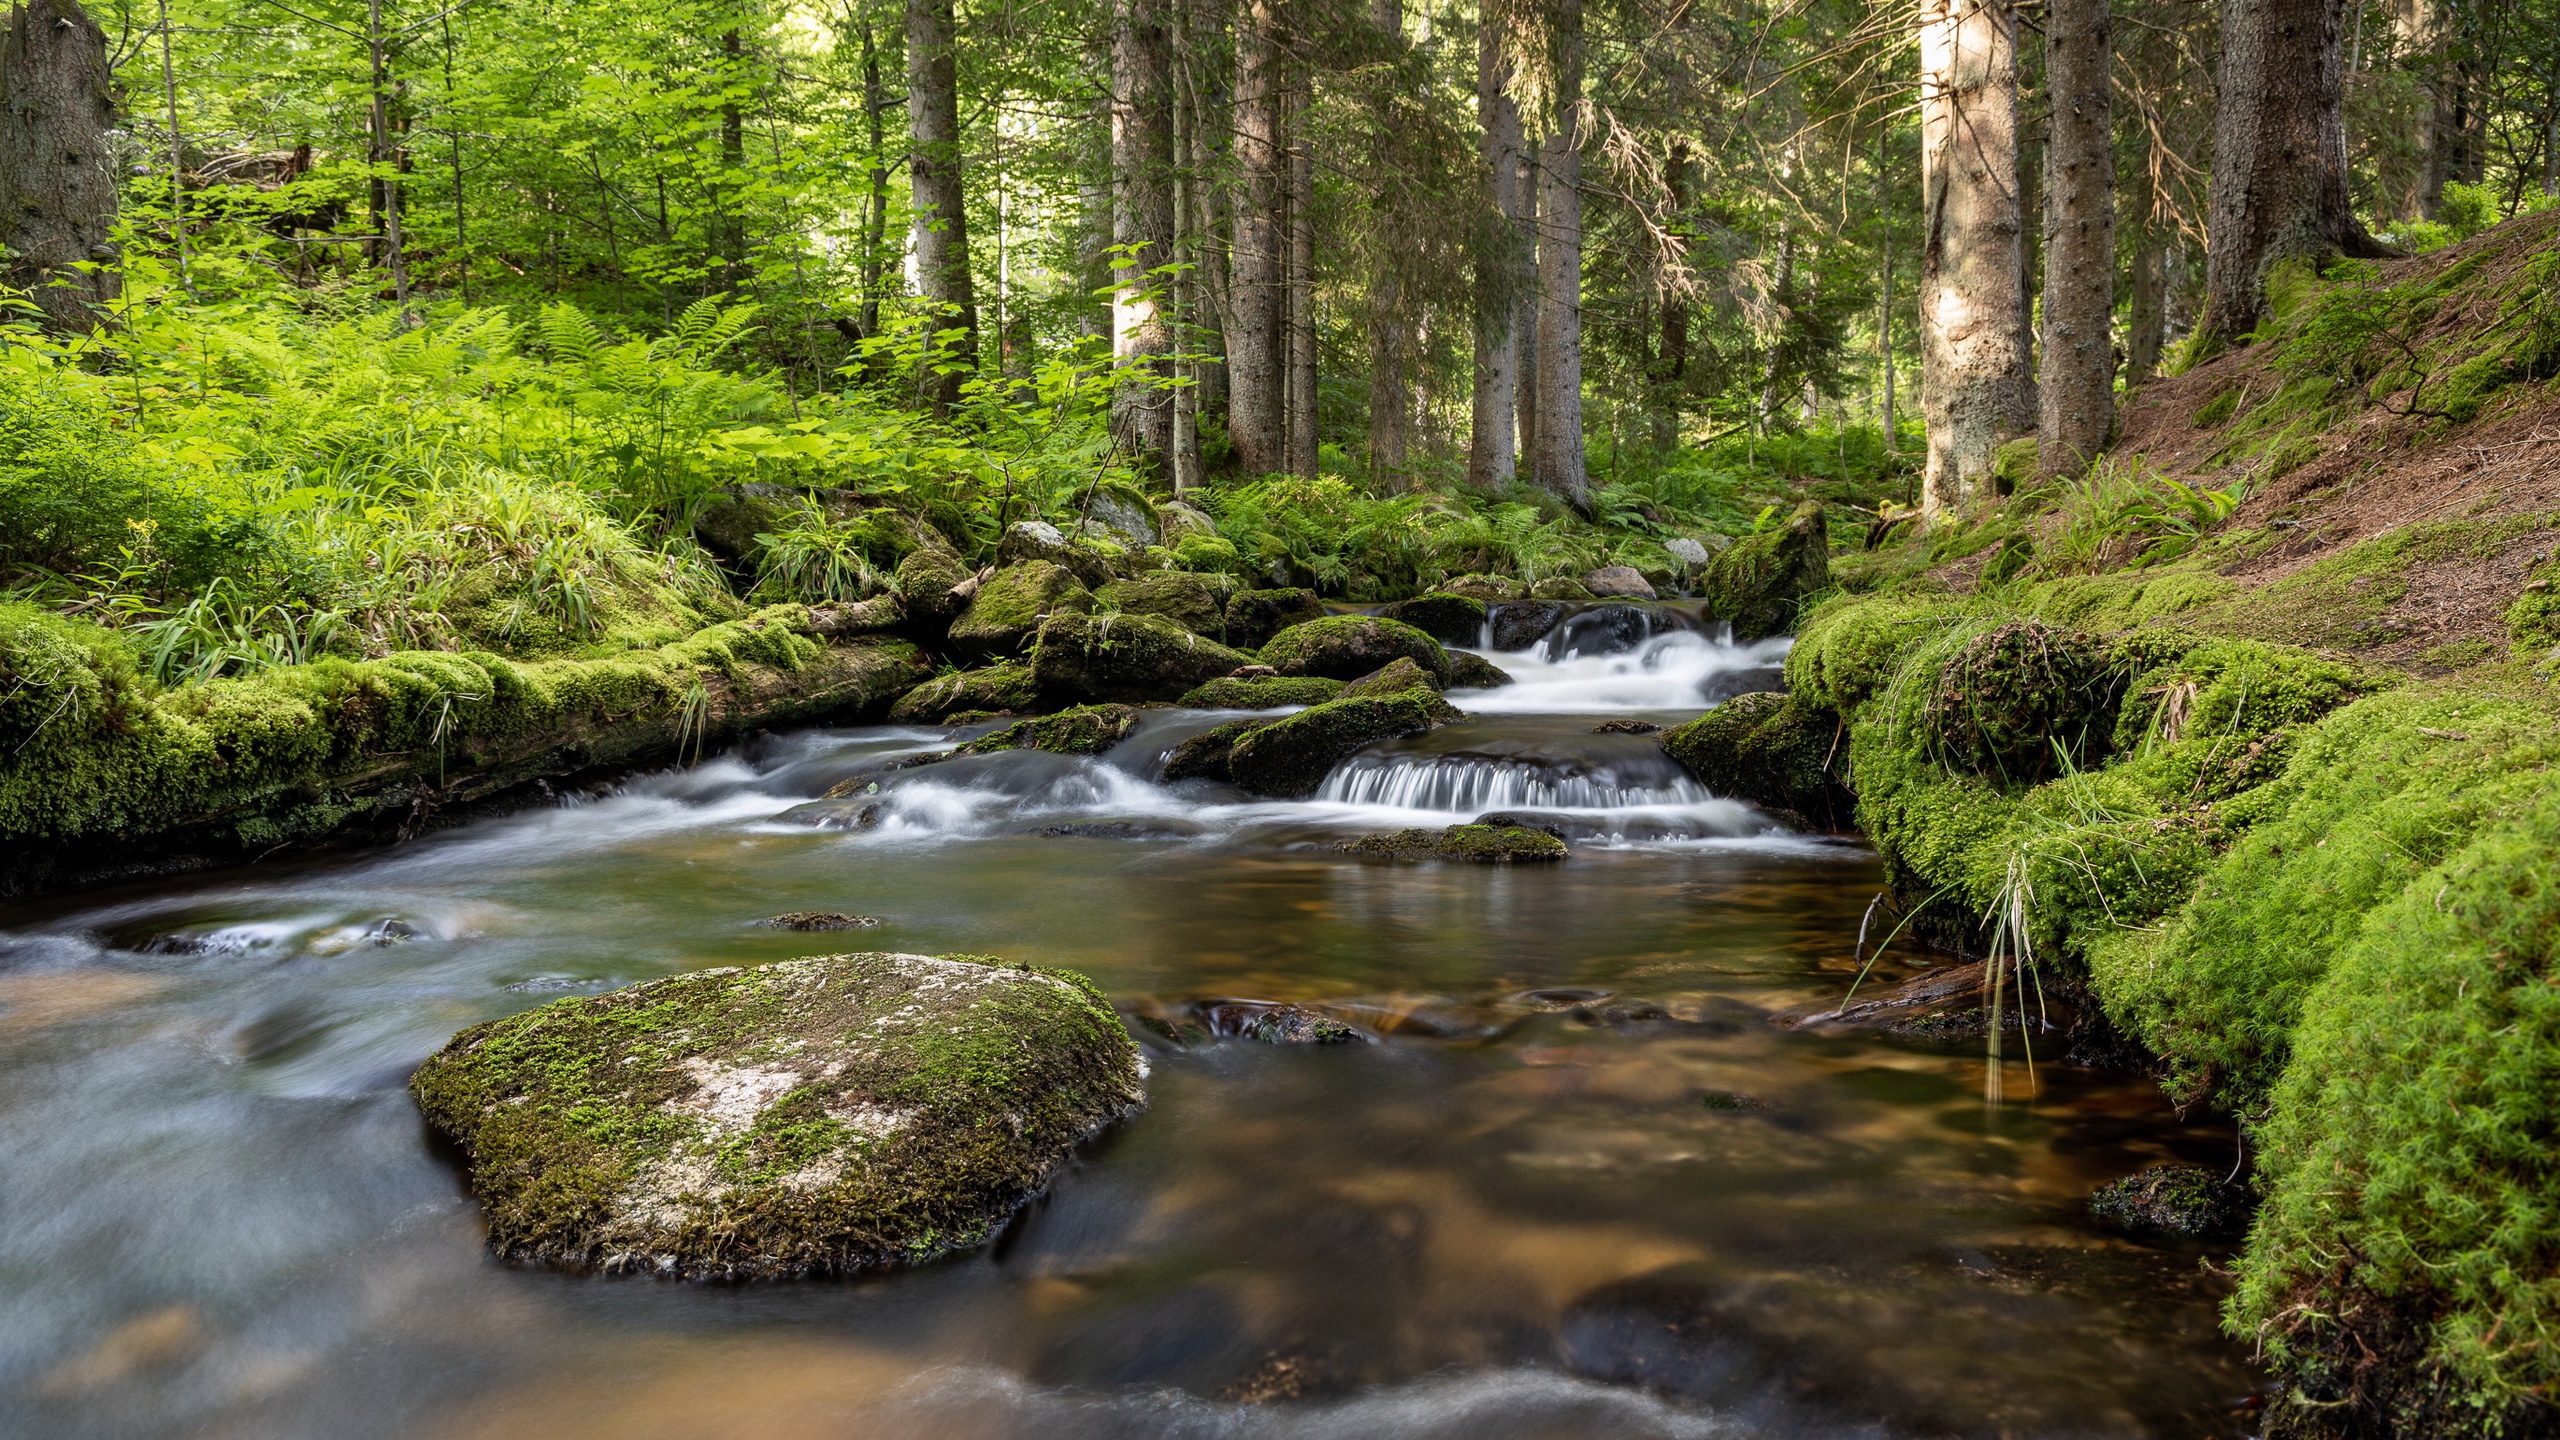 General 2560x1440 nature water creeks plants trees outdoors